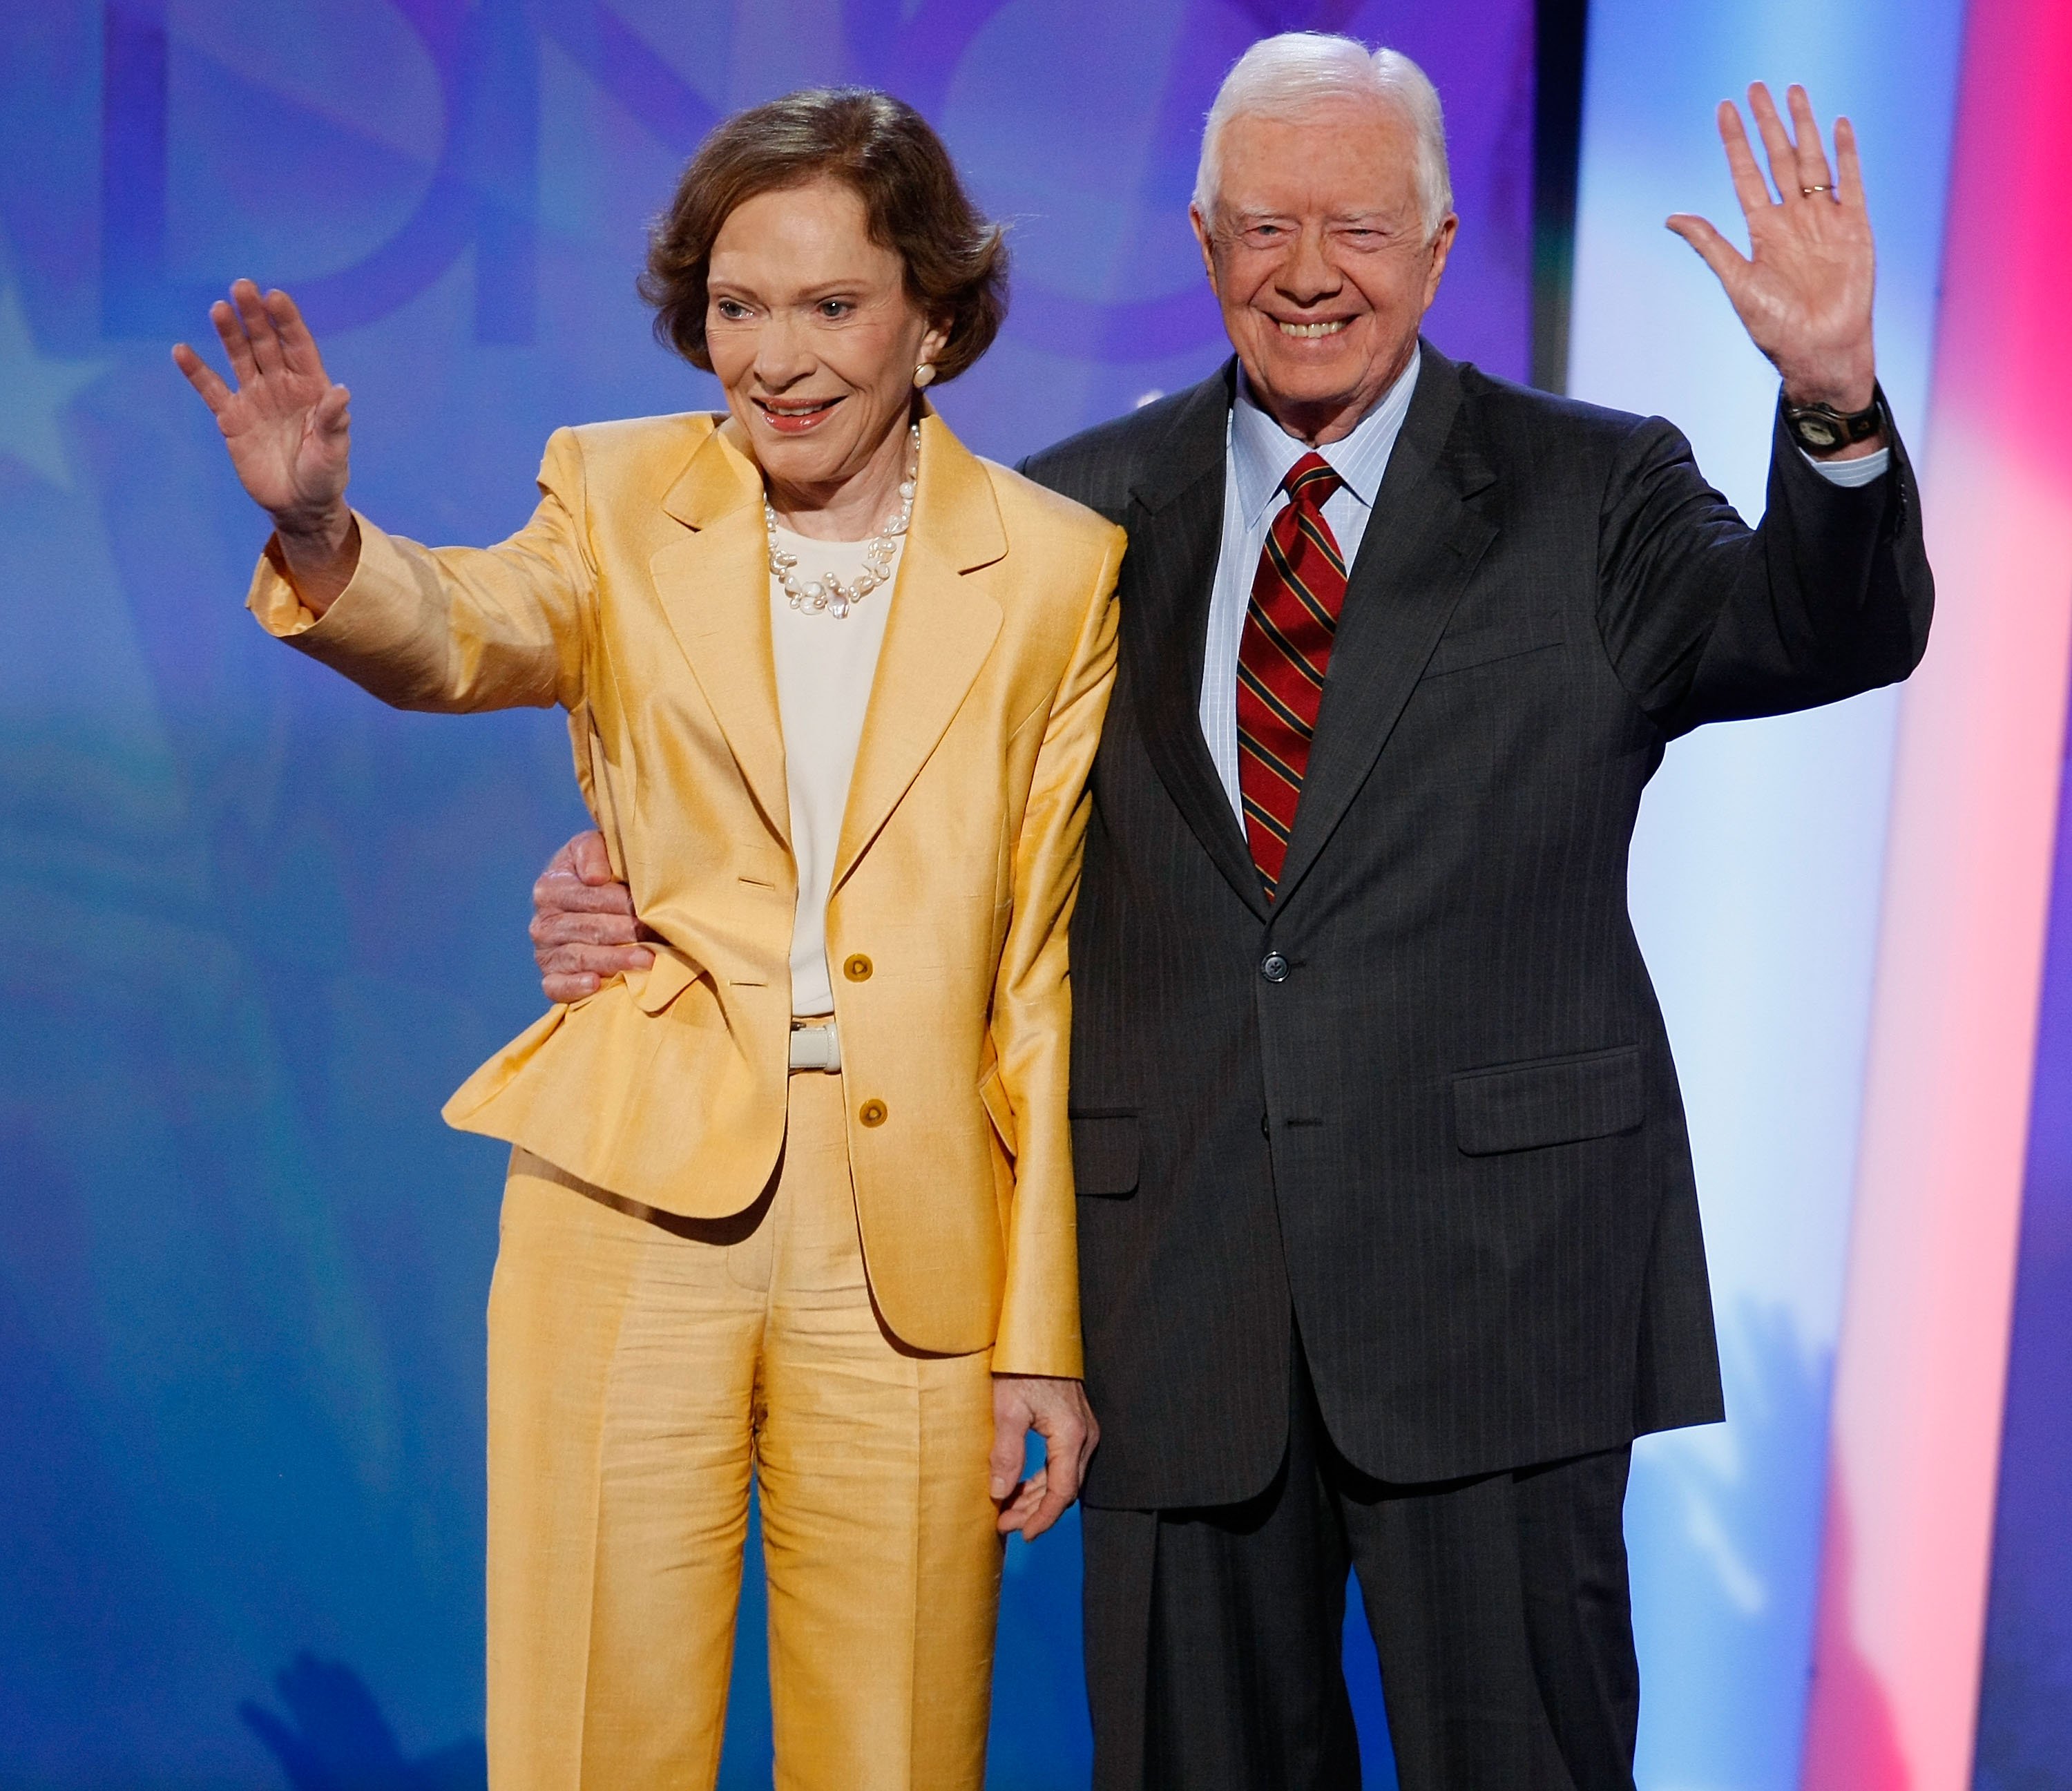 Former U.S. President Jimmy Carter and former first lady Rosalynn Carter on August 25, 2008 in Denver, Colorado. | Source: Getty Images